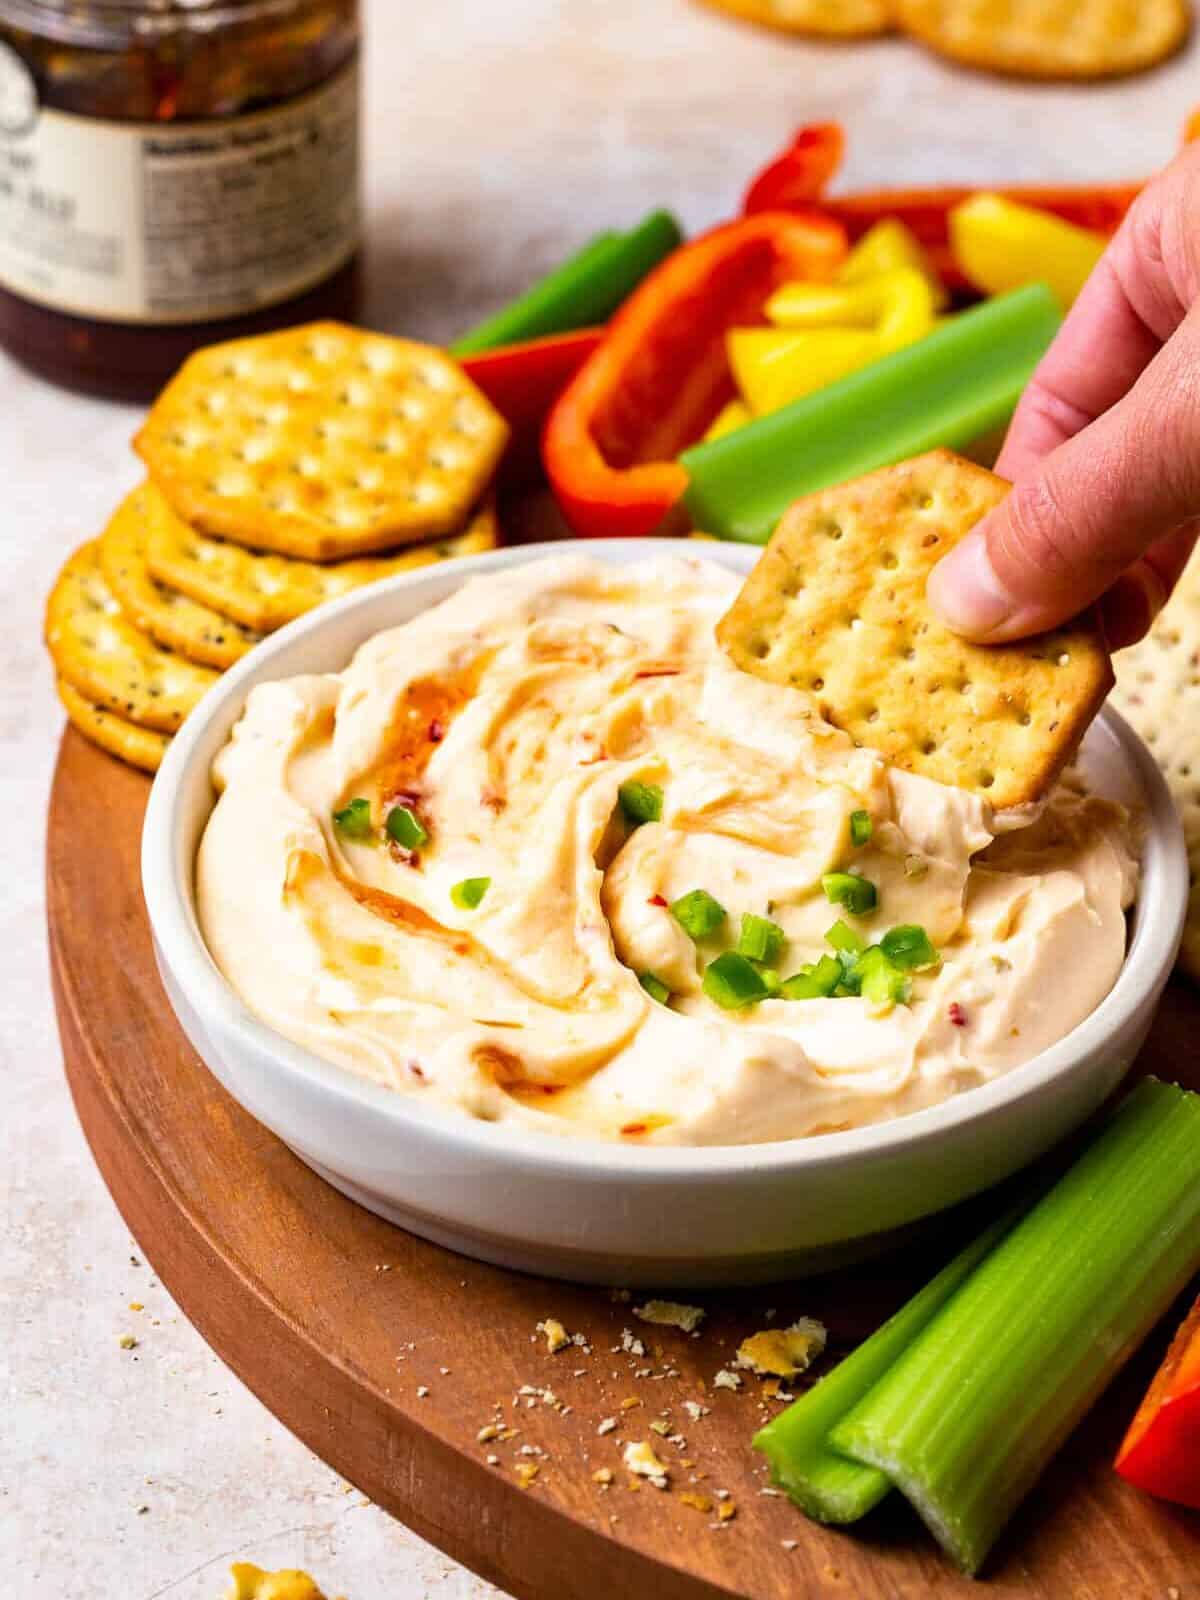 dipping a cracker into pepper jelly dip